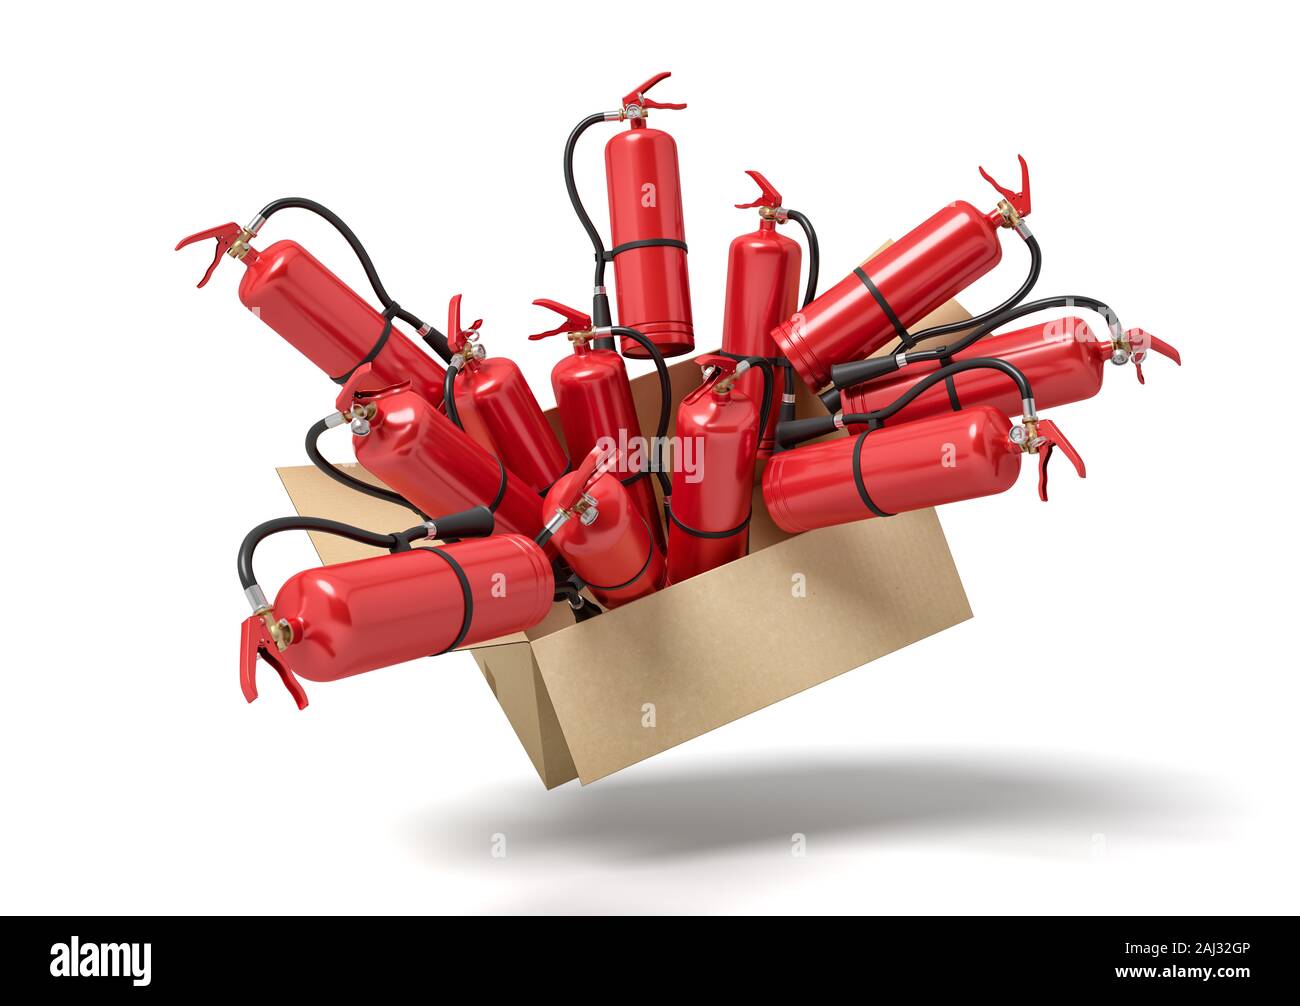 3d rendering of cardboard box in air full of red fire extinguishers which are popping out. Fire safety. Fire safety equipment. Well-equipped and ready Stock Photo